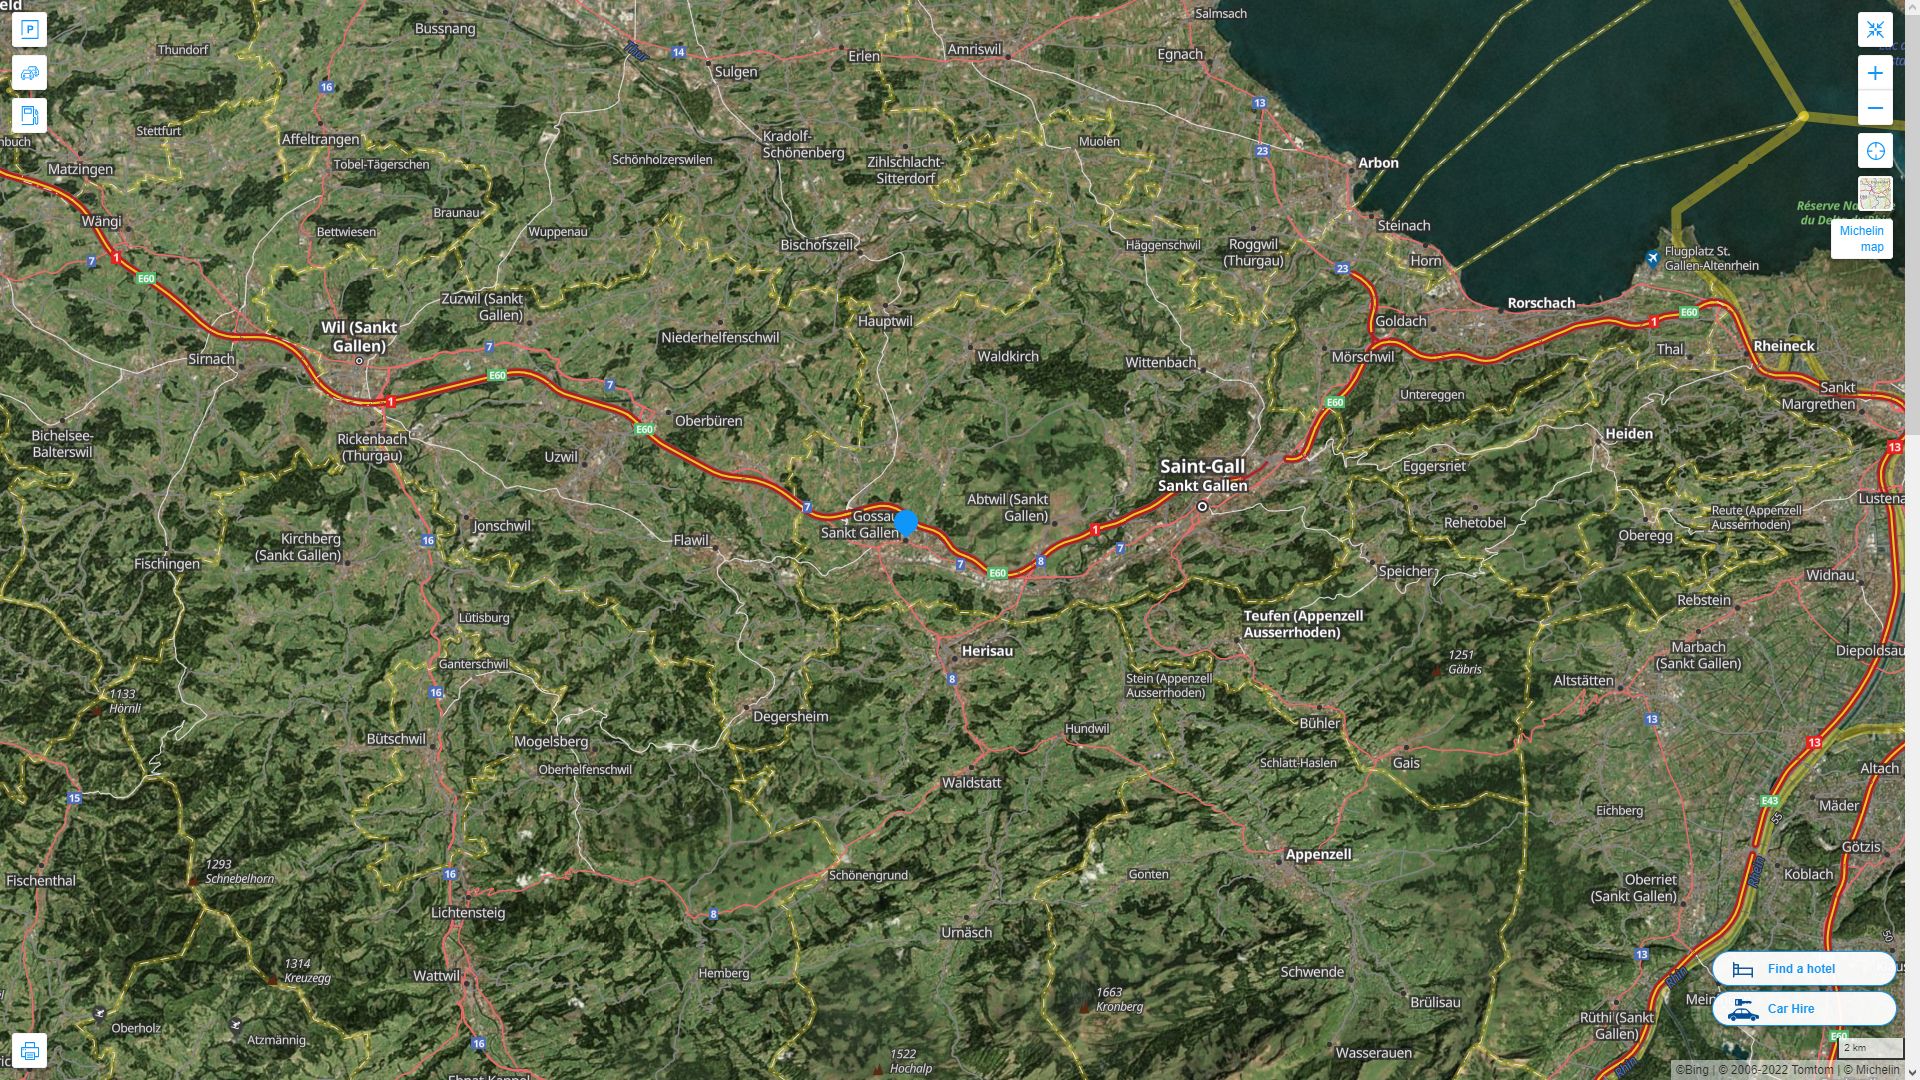 Gossau Highway and Road Map with Satellite View